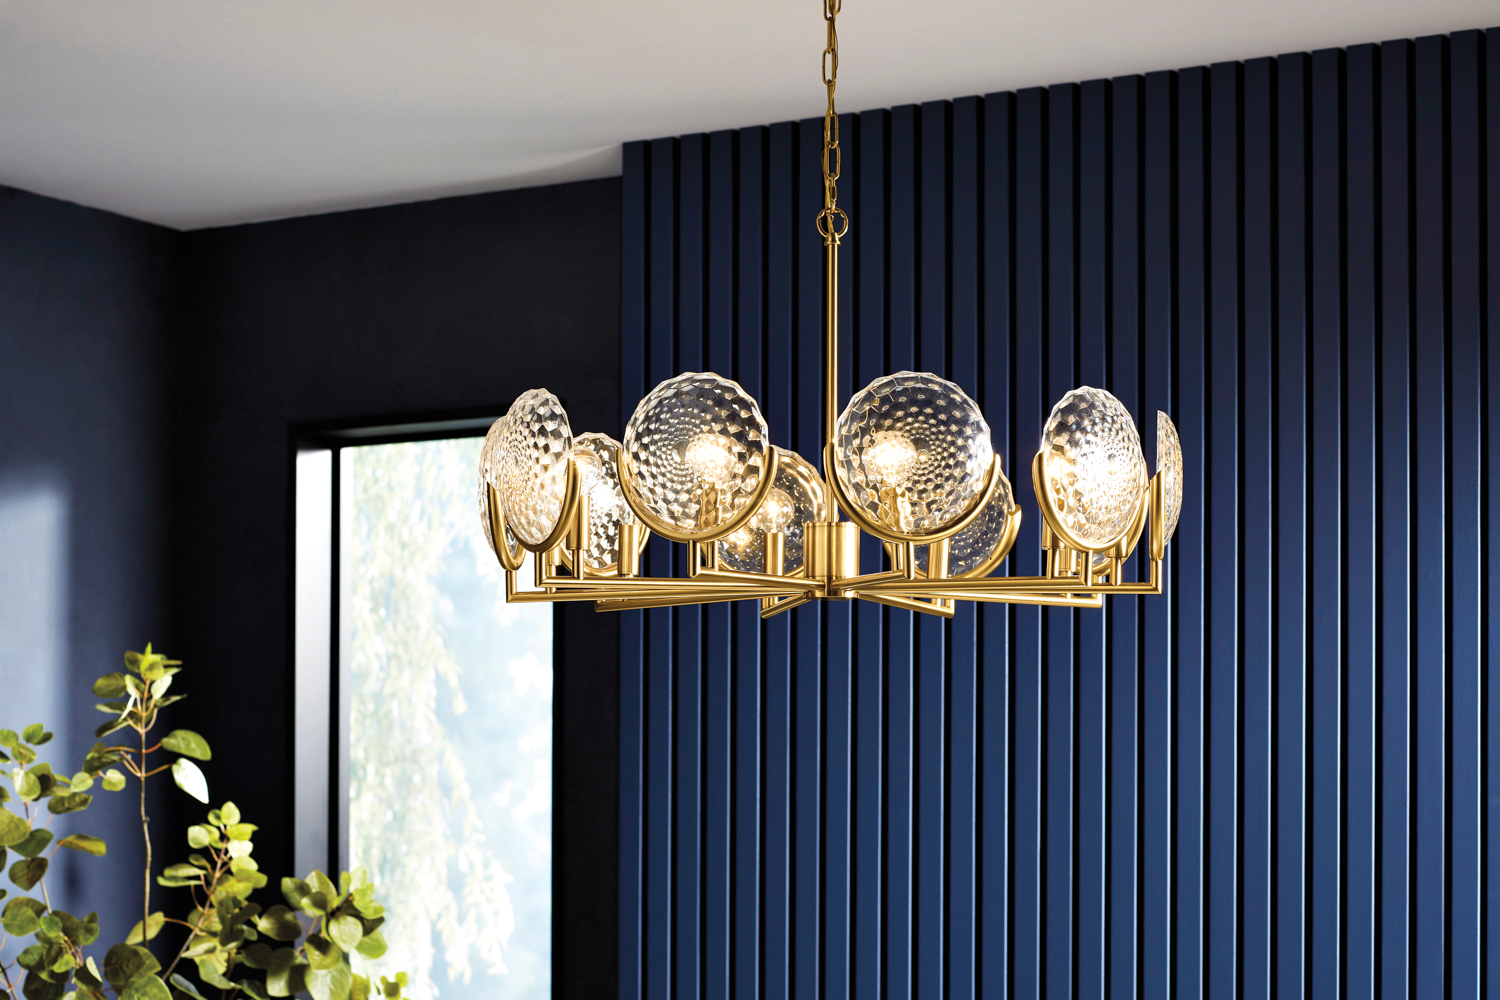 A gold chandelier with cut glass accents in a navy blue room. RED Winner.